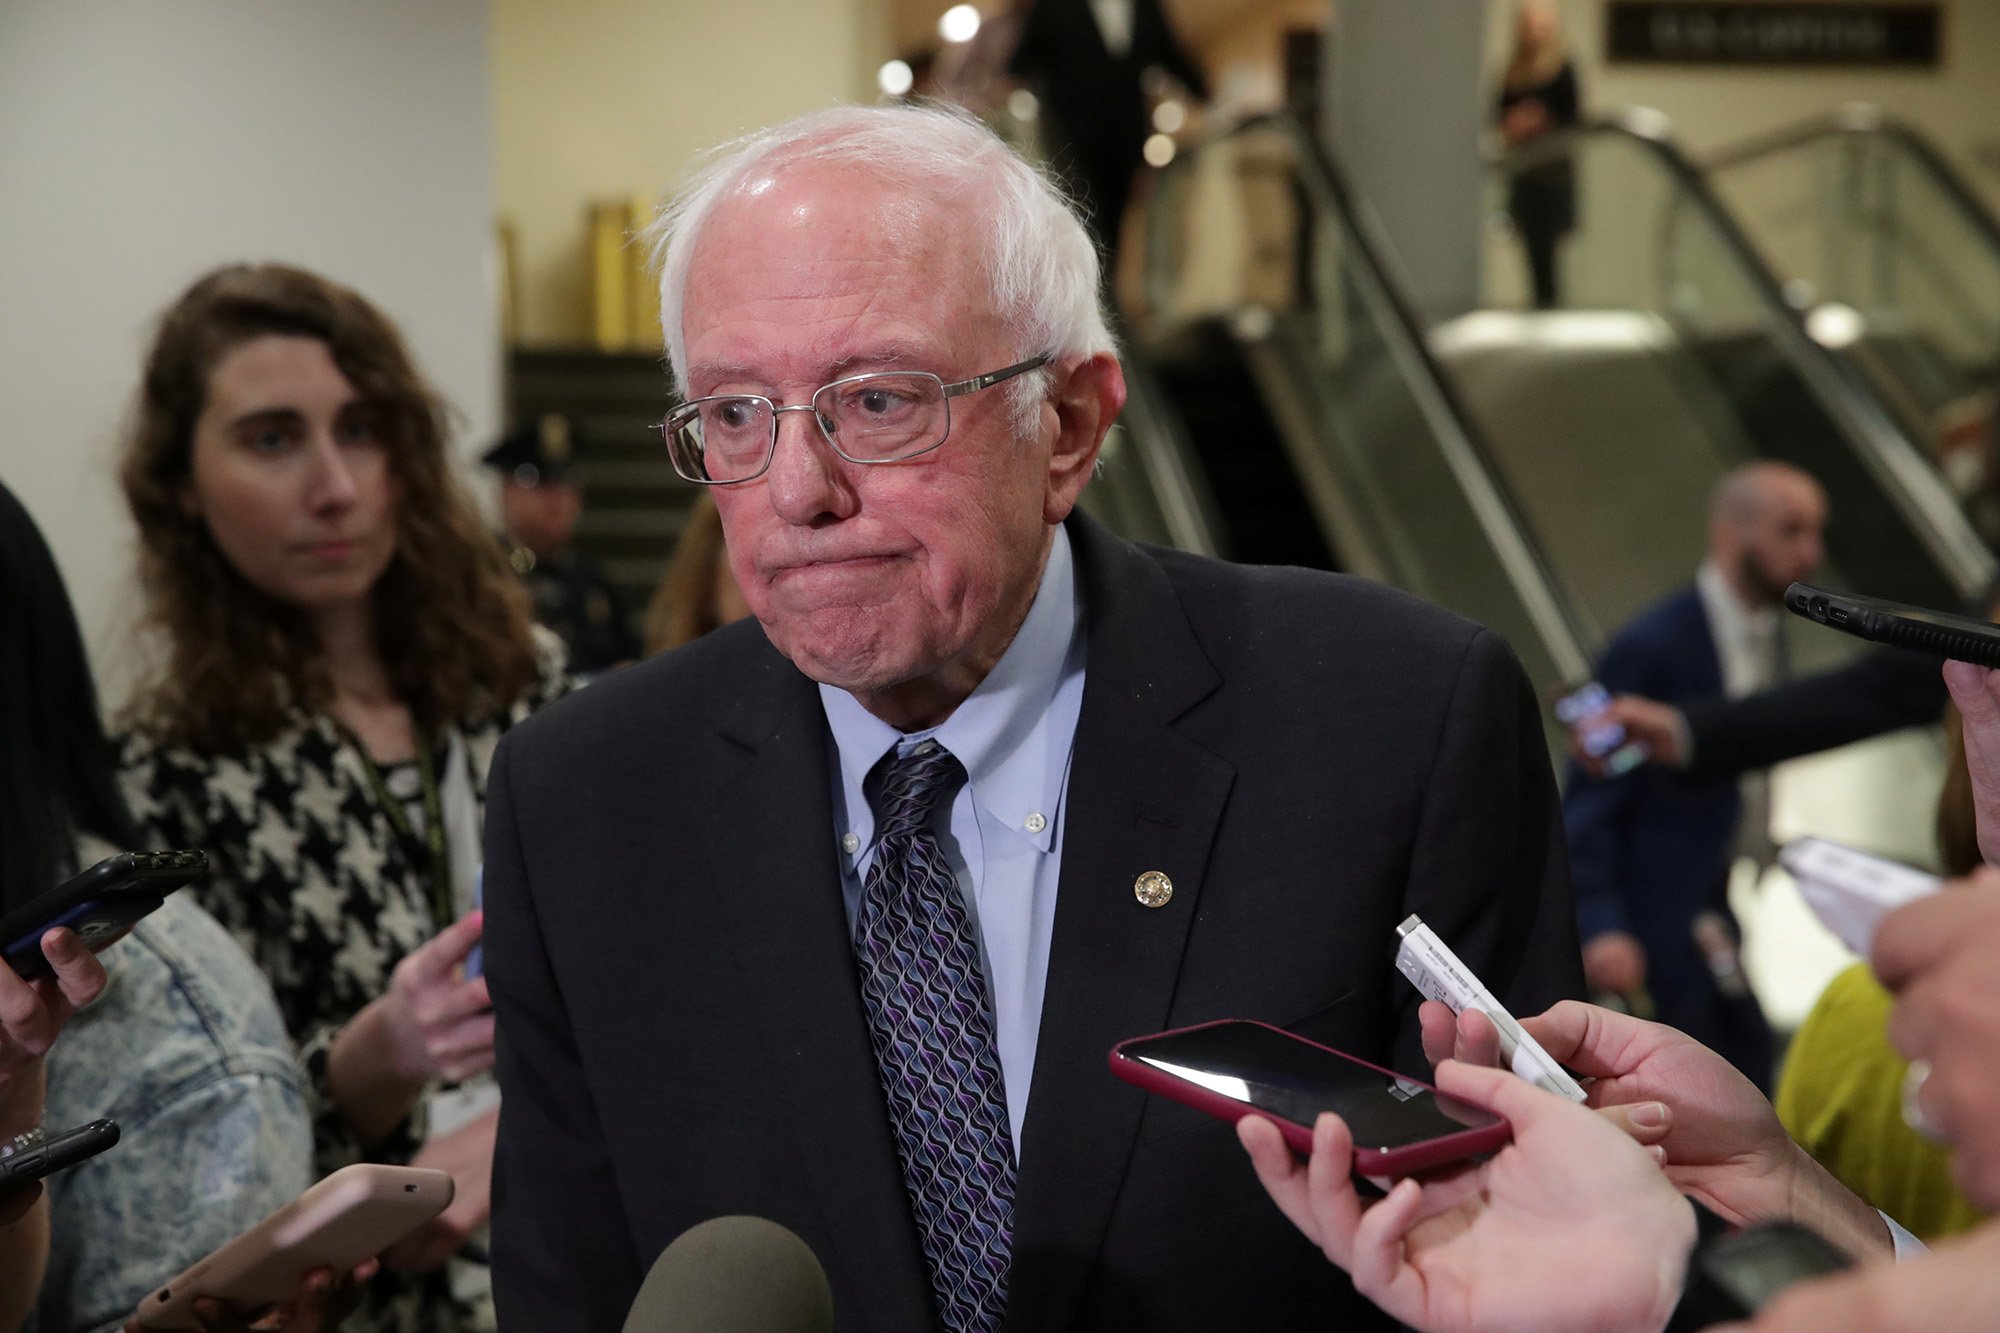 Democrats should scrutinize Bernie Sanders and other ...